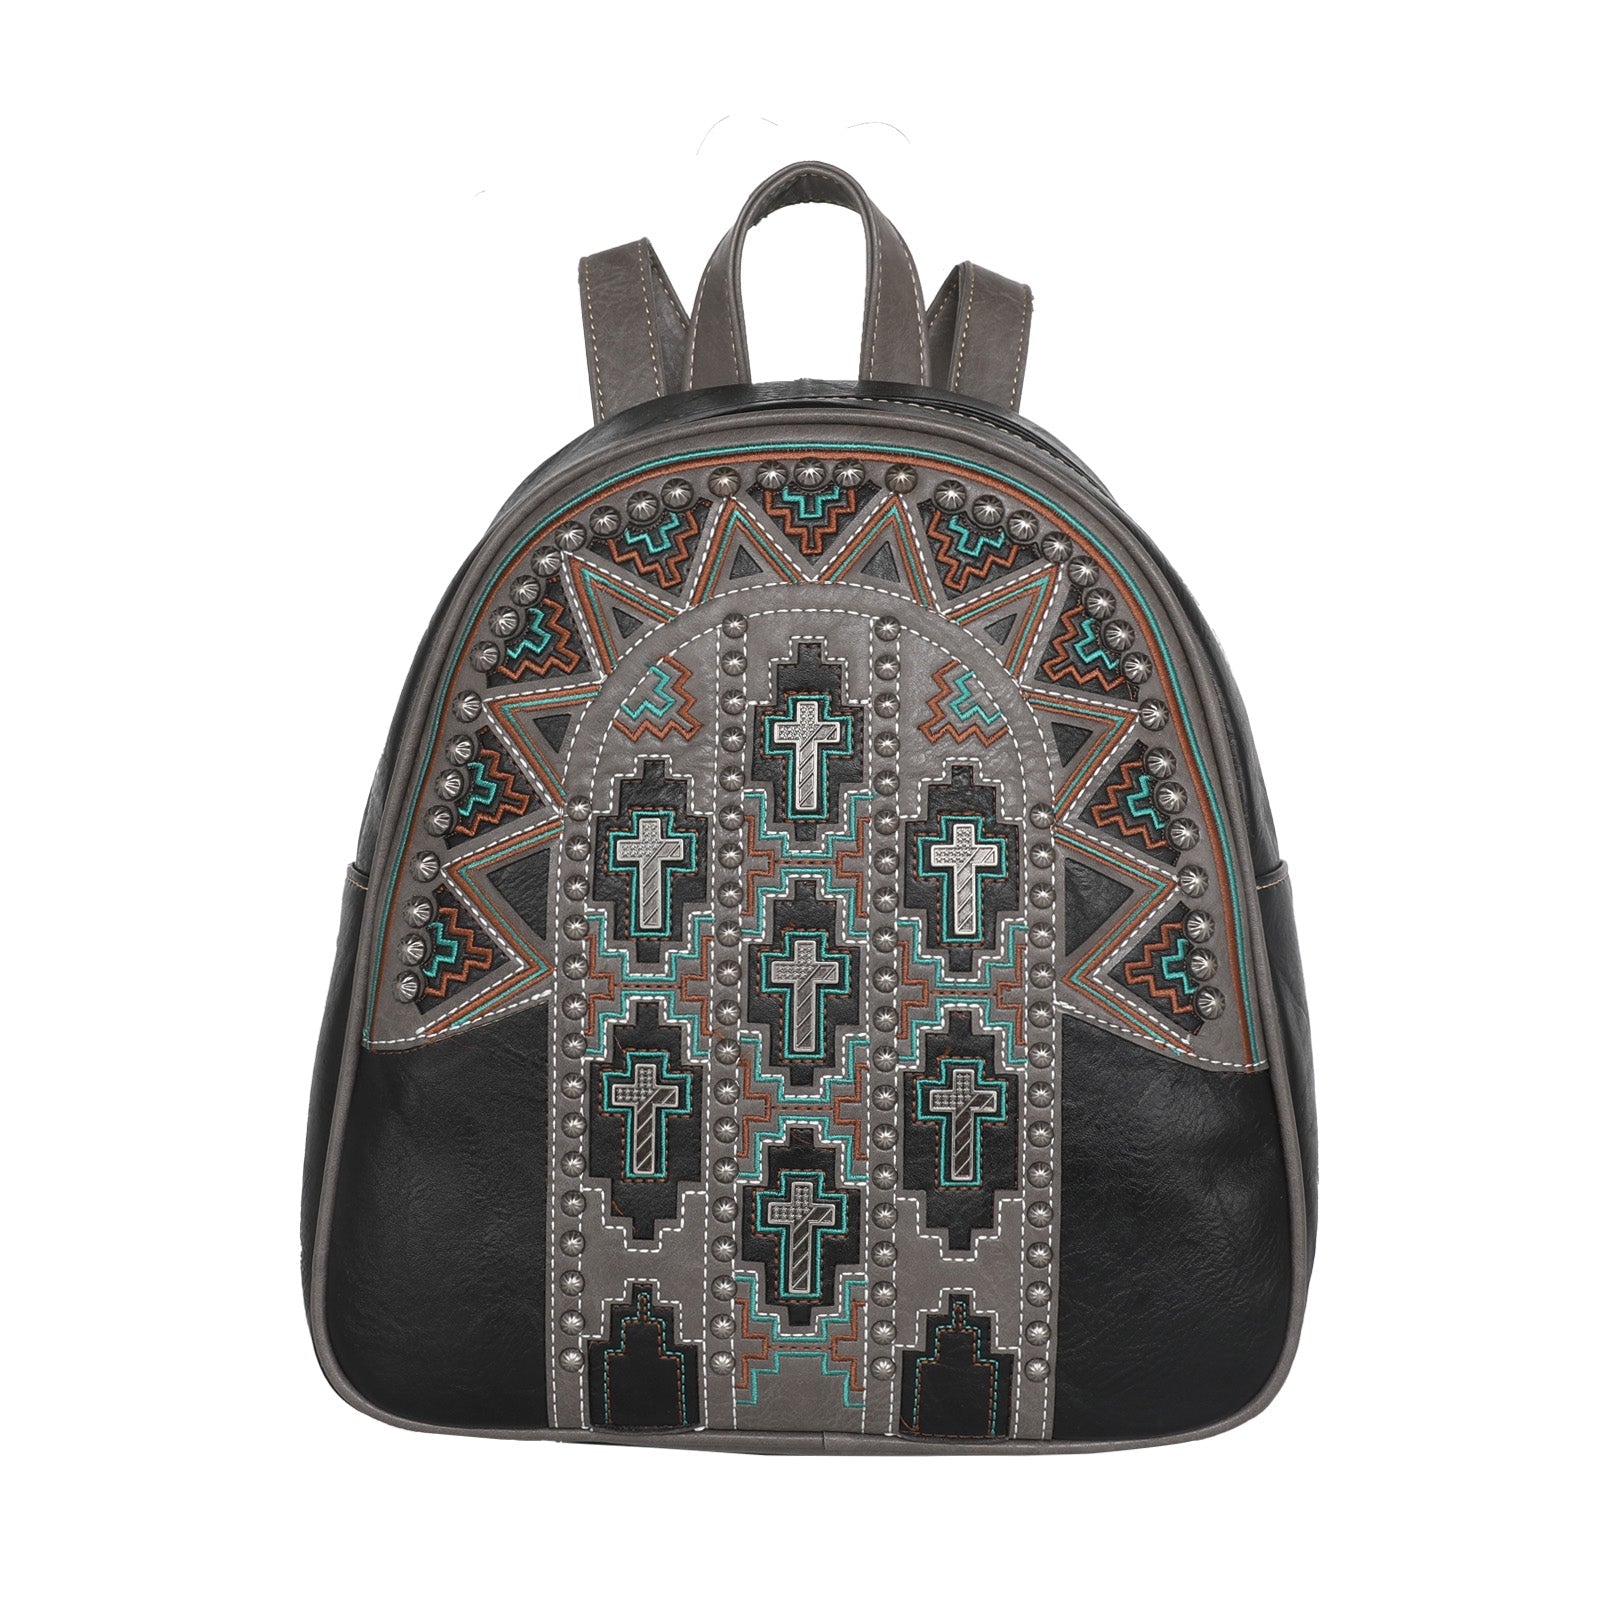 Montana West Concho Collection Backpack - Cowgirl Wear